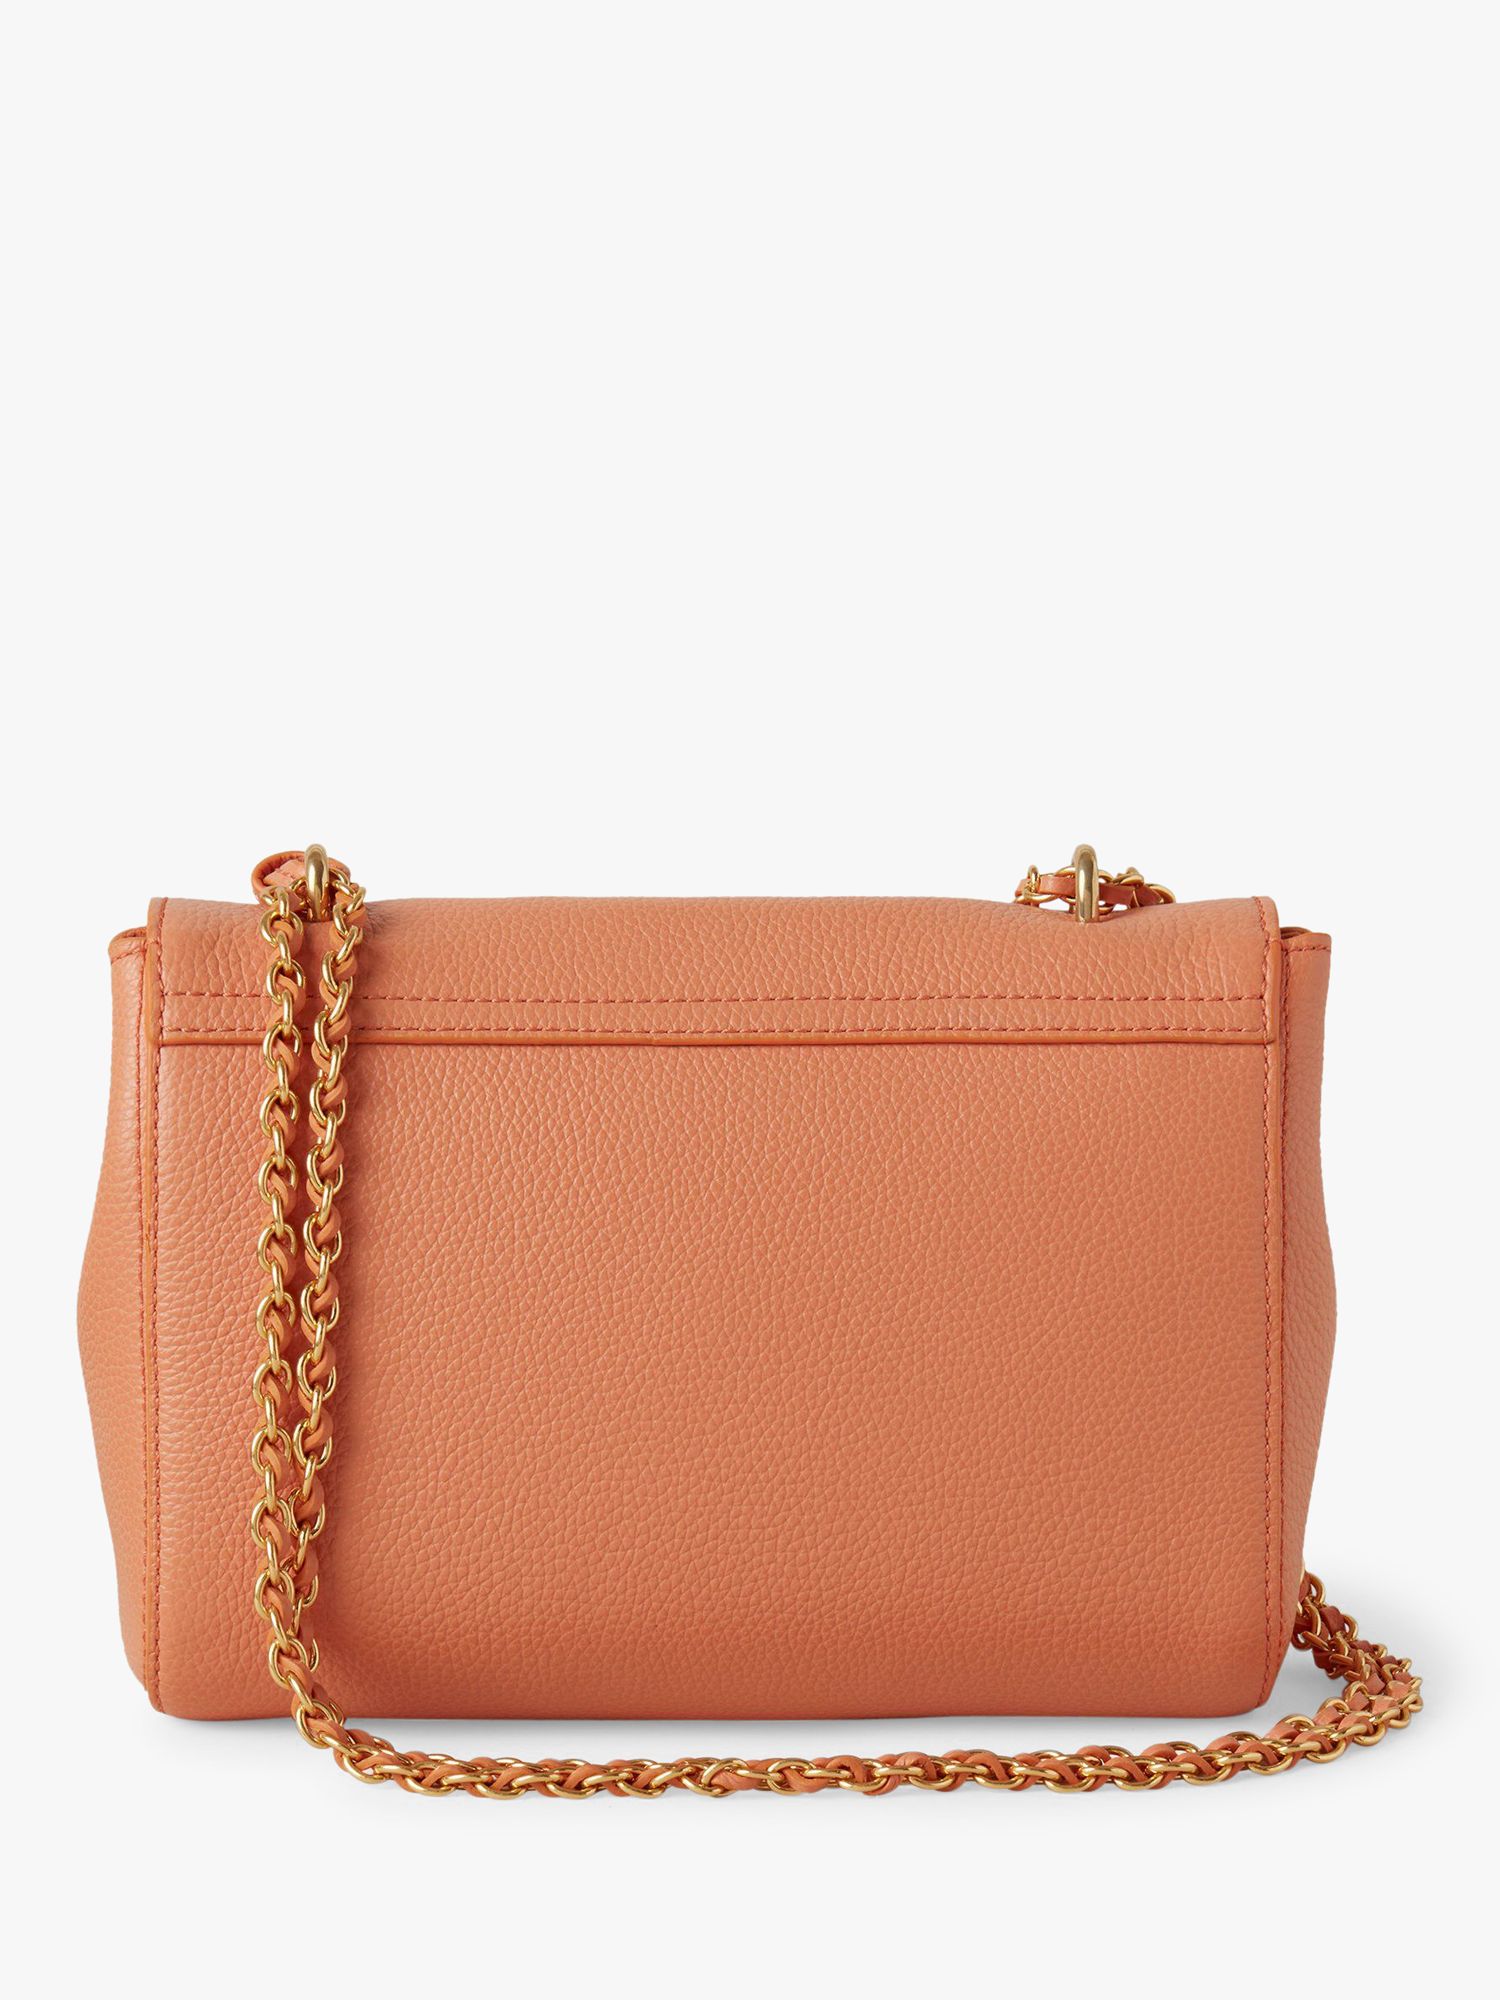 Mulberry Lily Classic Grain Leather Shoulder Bag, Apricot at John Lewis ...